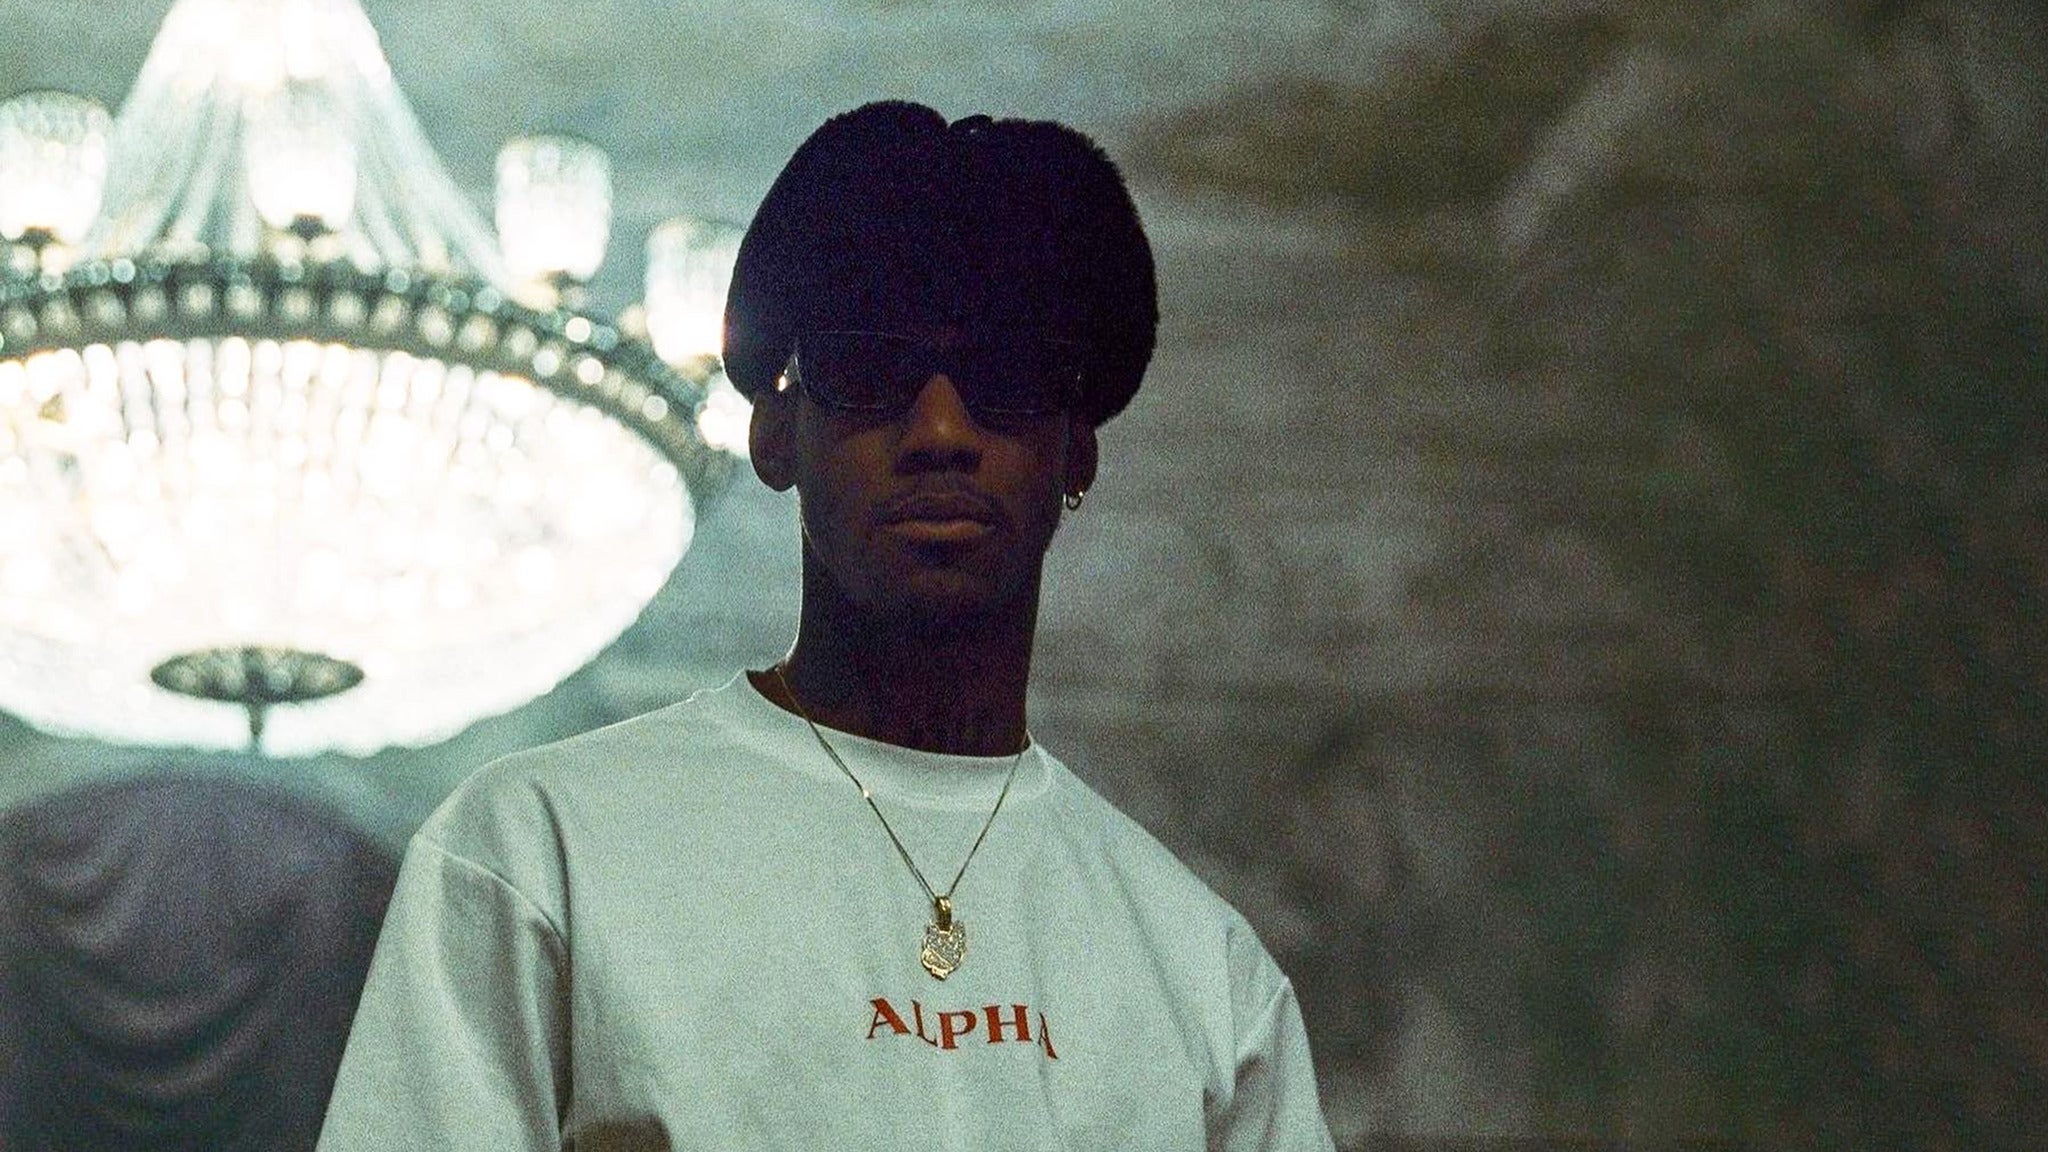 Octavian presale code for early tickets in Los Angeles